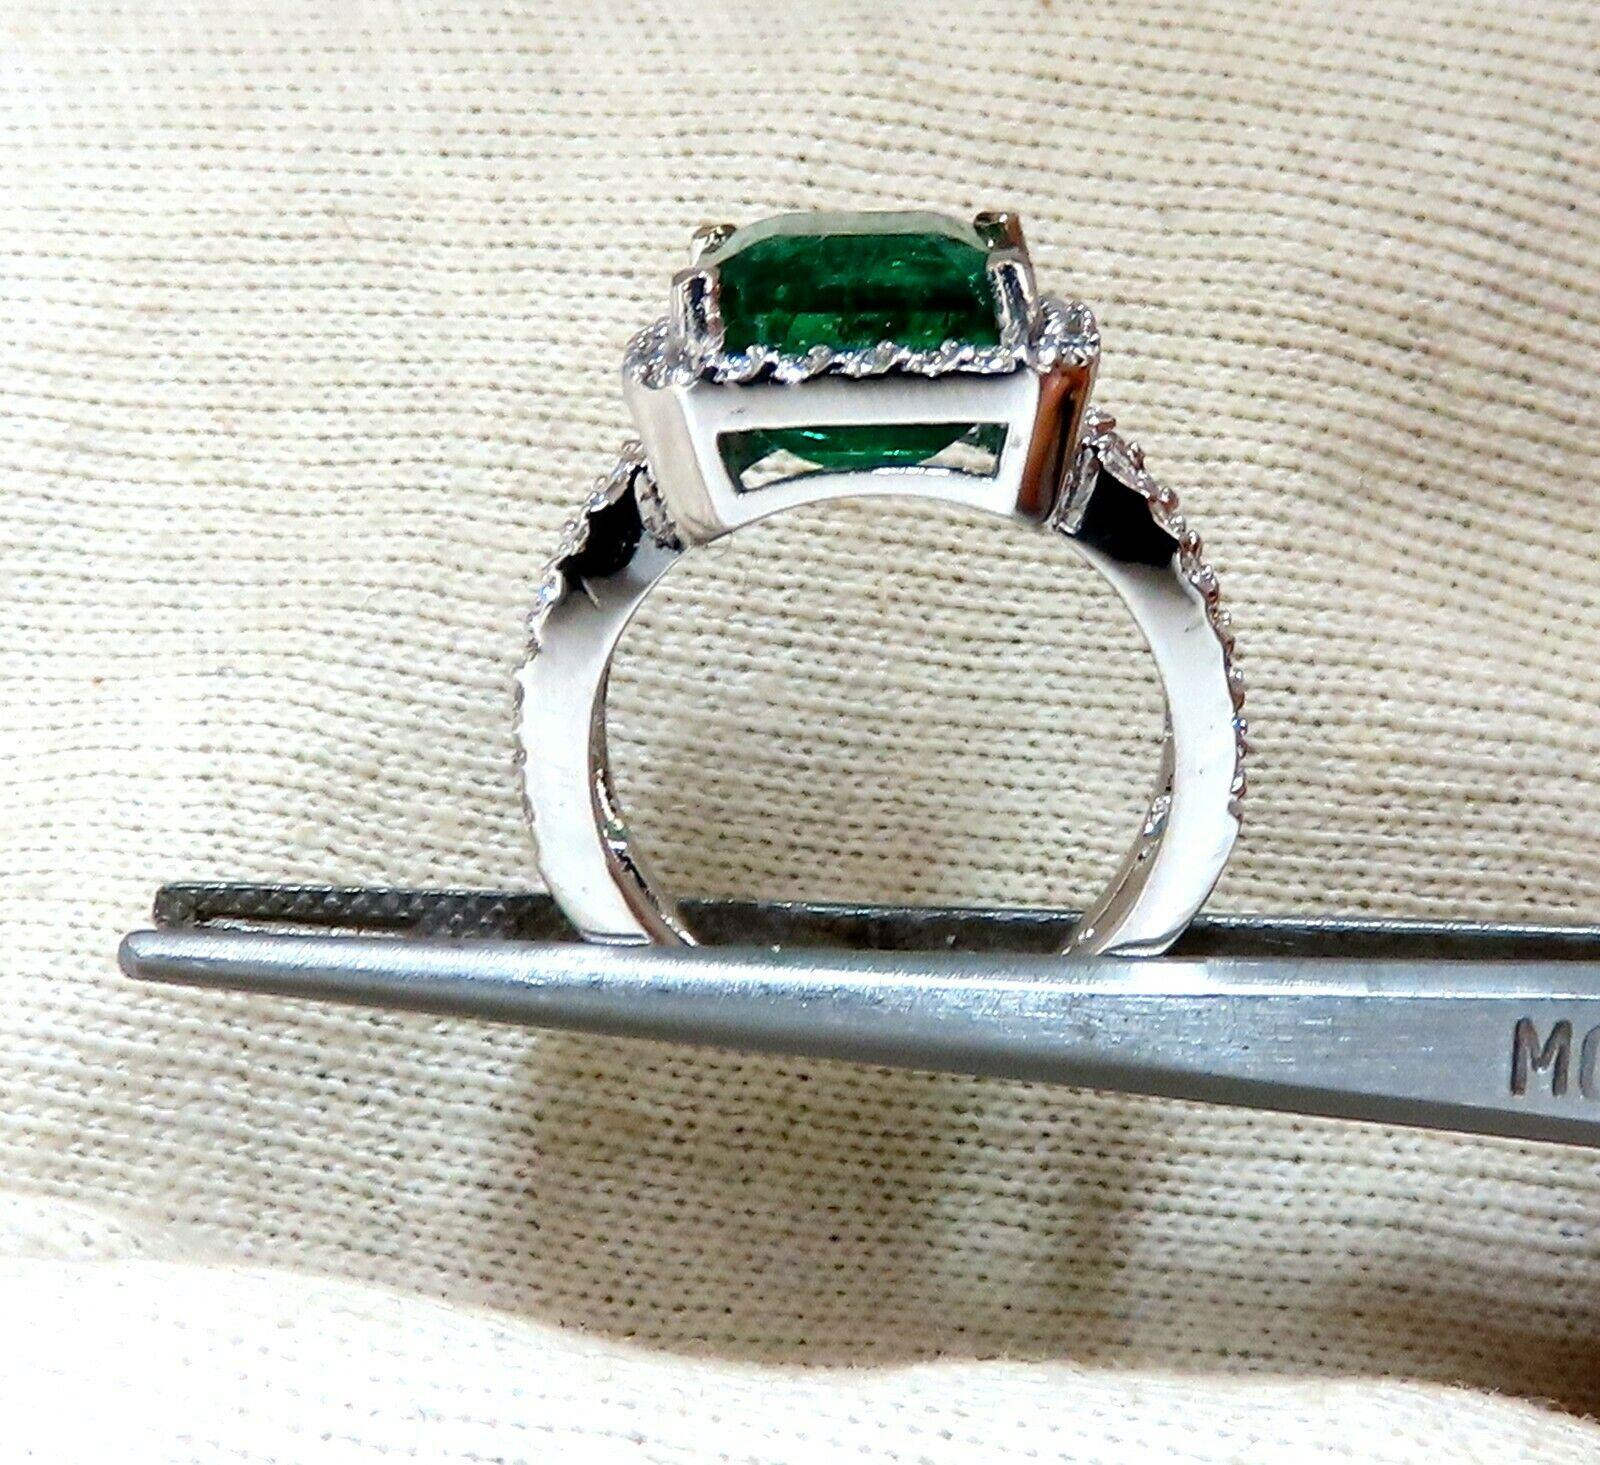 Split Shank Vivid Green.

6.70ct. Natural Emerald Ring

Emerald cut Brilliant 

11 x 9.7mm 

Transparent & Vivid Green 

.66ct. Diamonds.

Rounds & full cuts 

G-color Vs-2 clarity.  

14kt. white gold

7.7 grams

Ring Current size: 6.5

Depth of